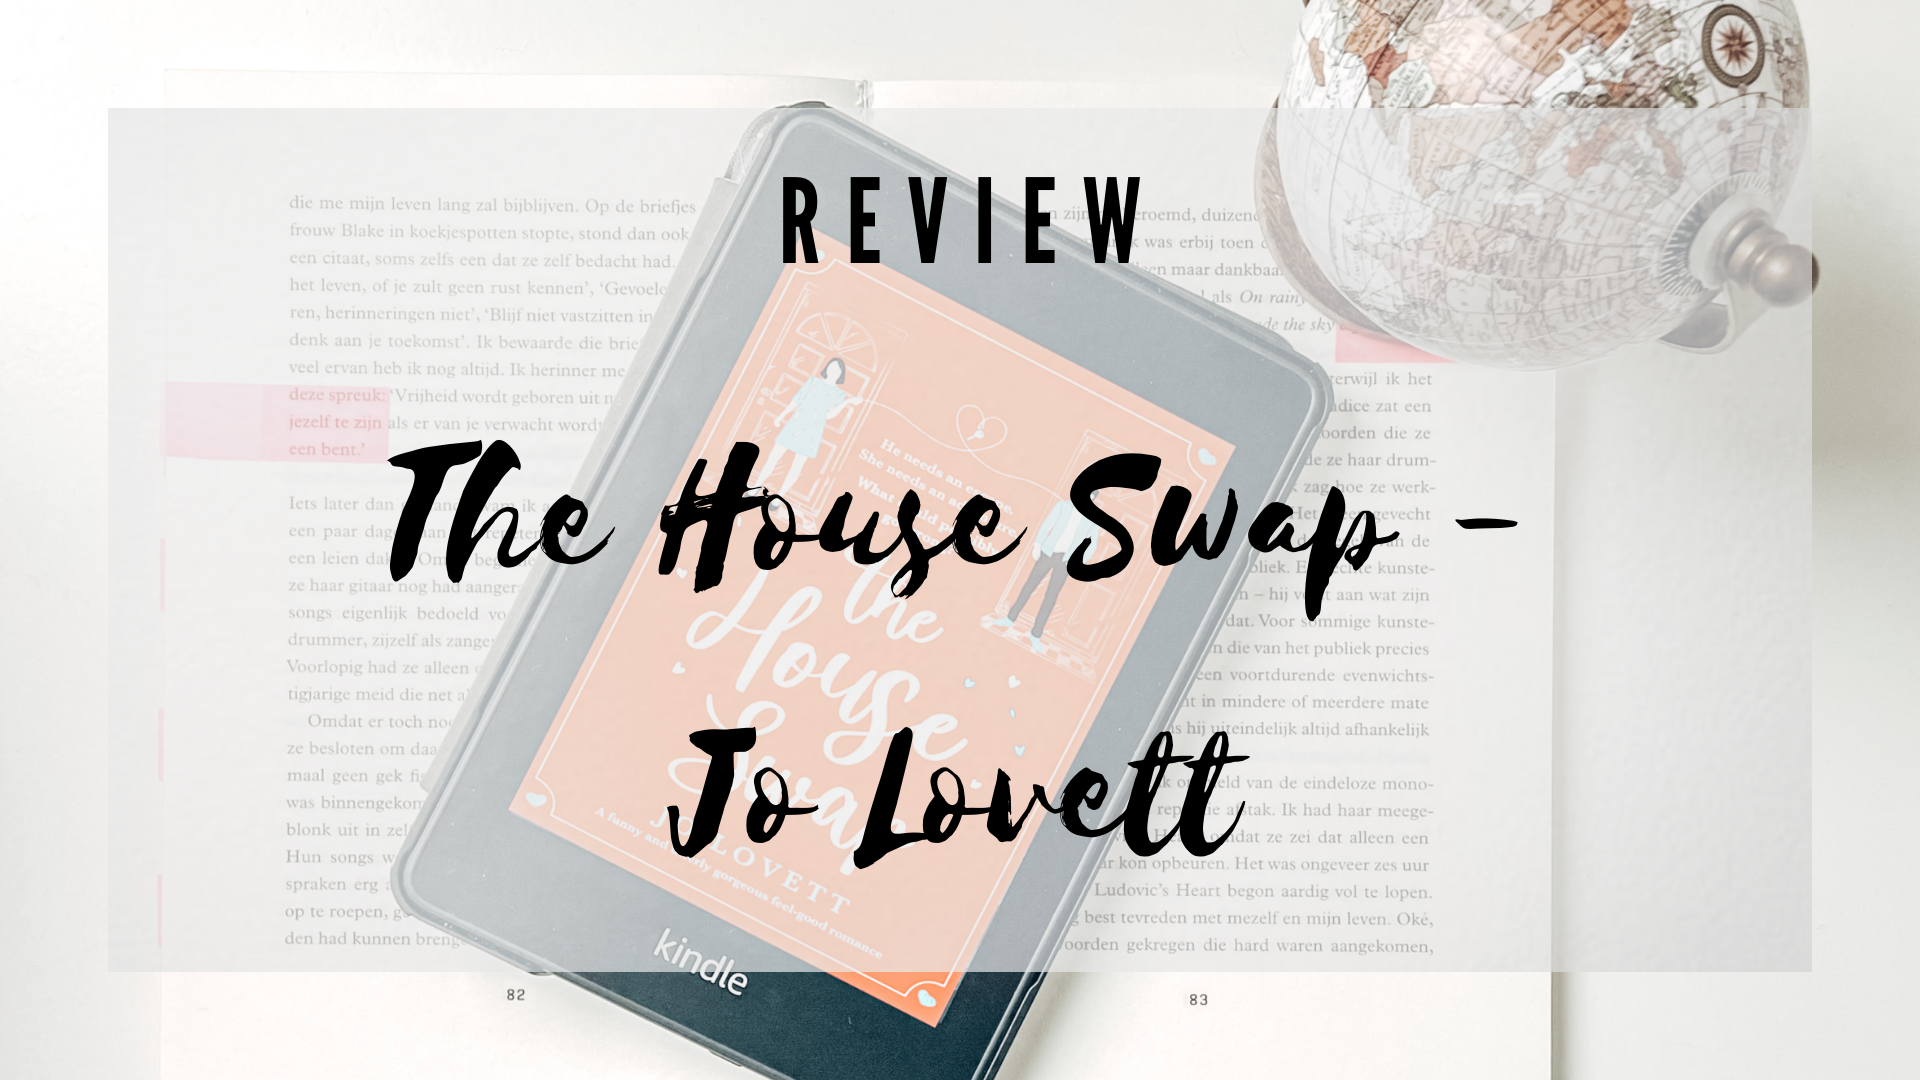 Review: The House Swap